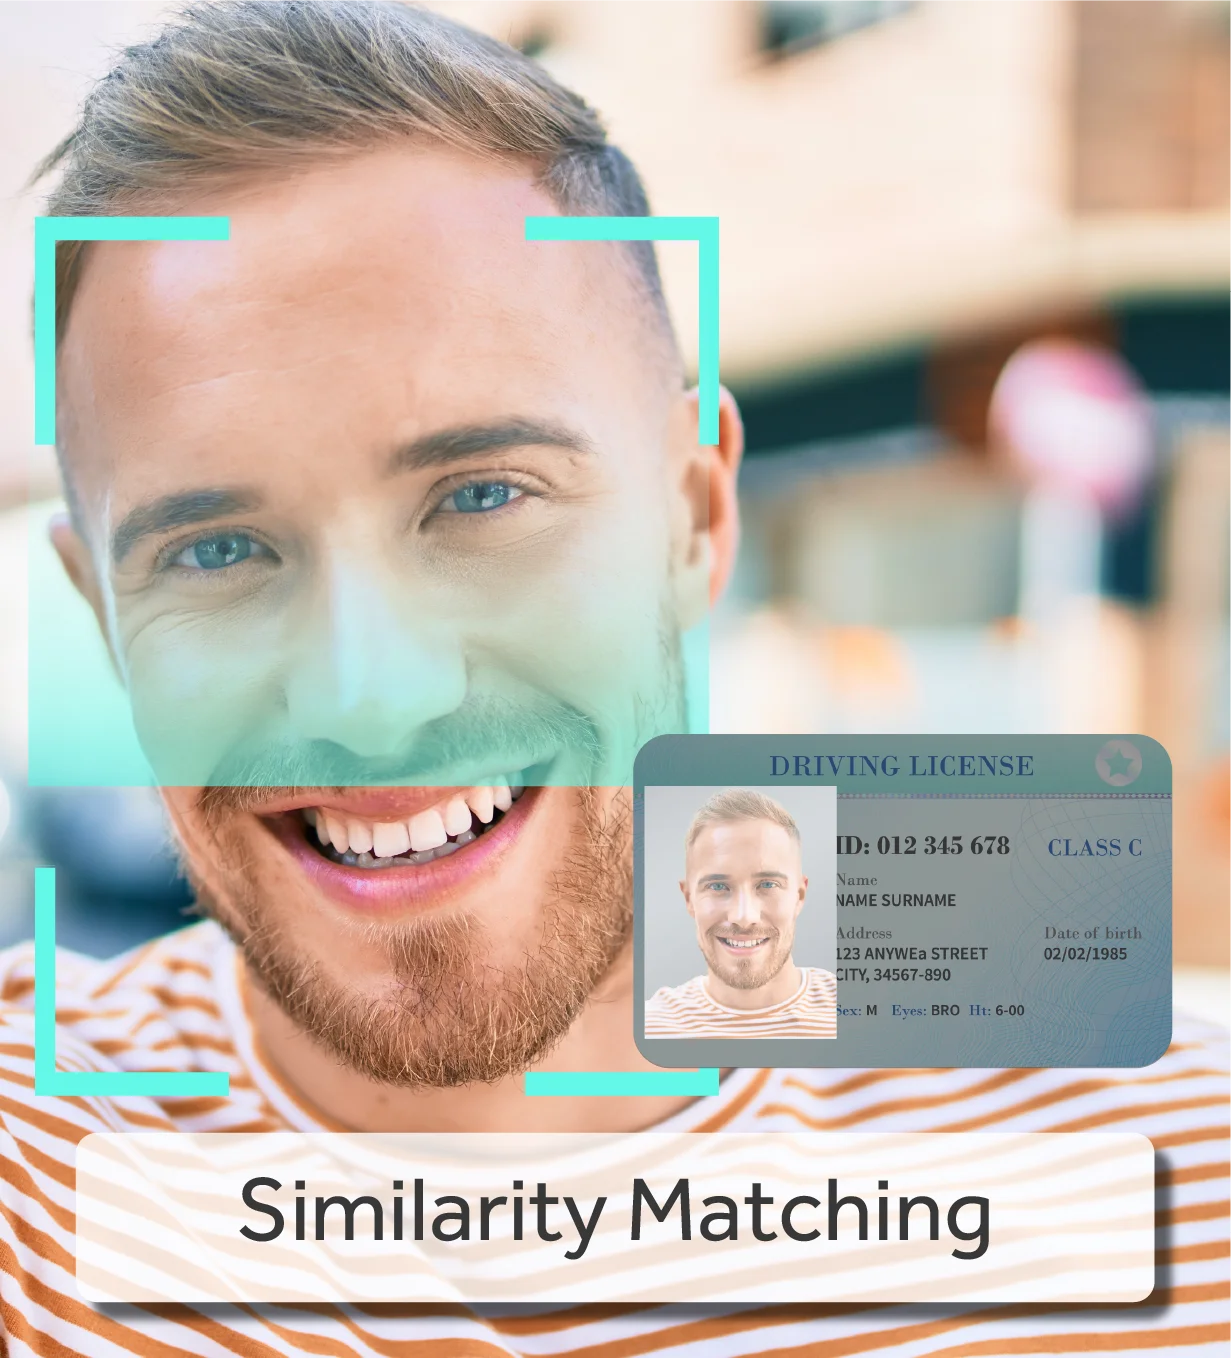 Advanced algorithms analyze both the digital ID image and the live selfie to detect and measure the likeness between facial features, such as distance between the eyes, nose shape, and other key characteristics.